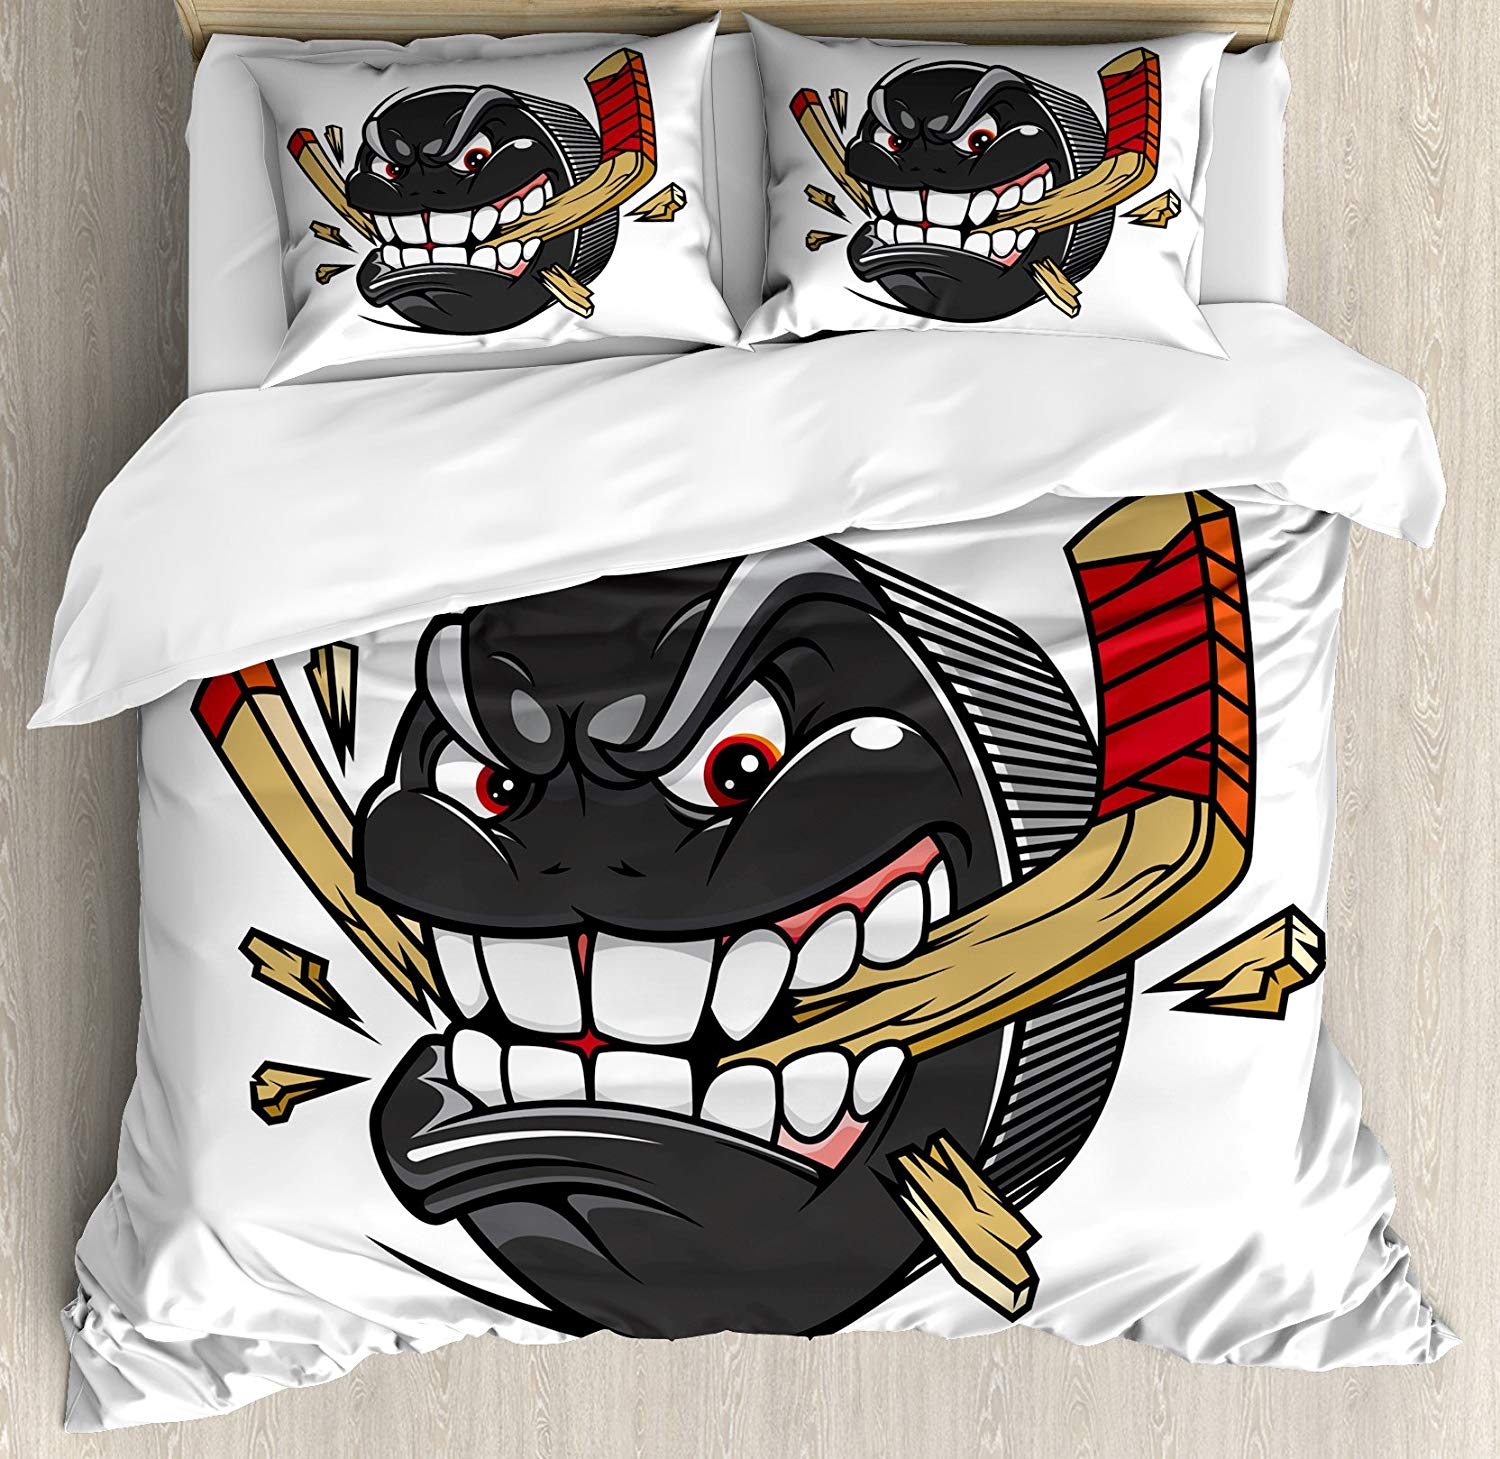 Us 8251 41 Offhockey Duvet Cover Set Cartoon Hockey Puck Bites And Breaks Hockey Stick Championship Game Mascot Character 3pcs Bedding Set In within sizing 1500 X 1459